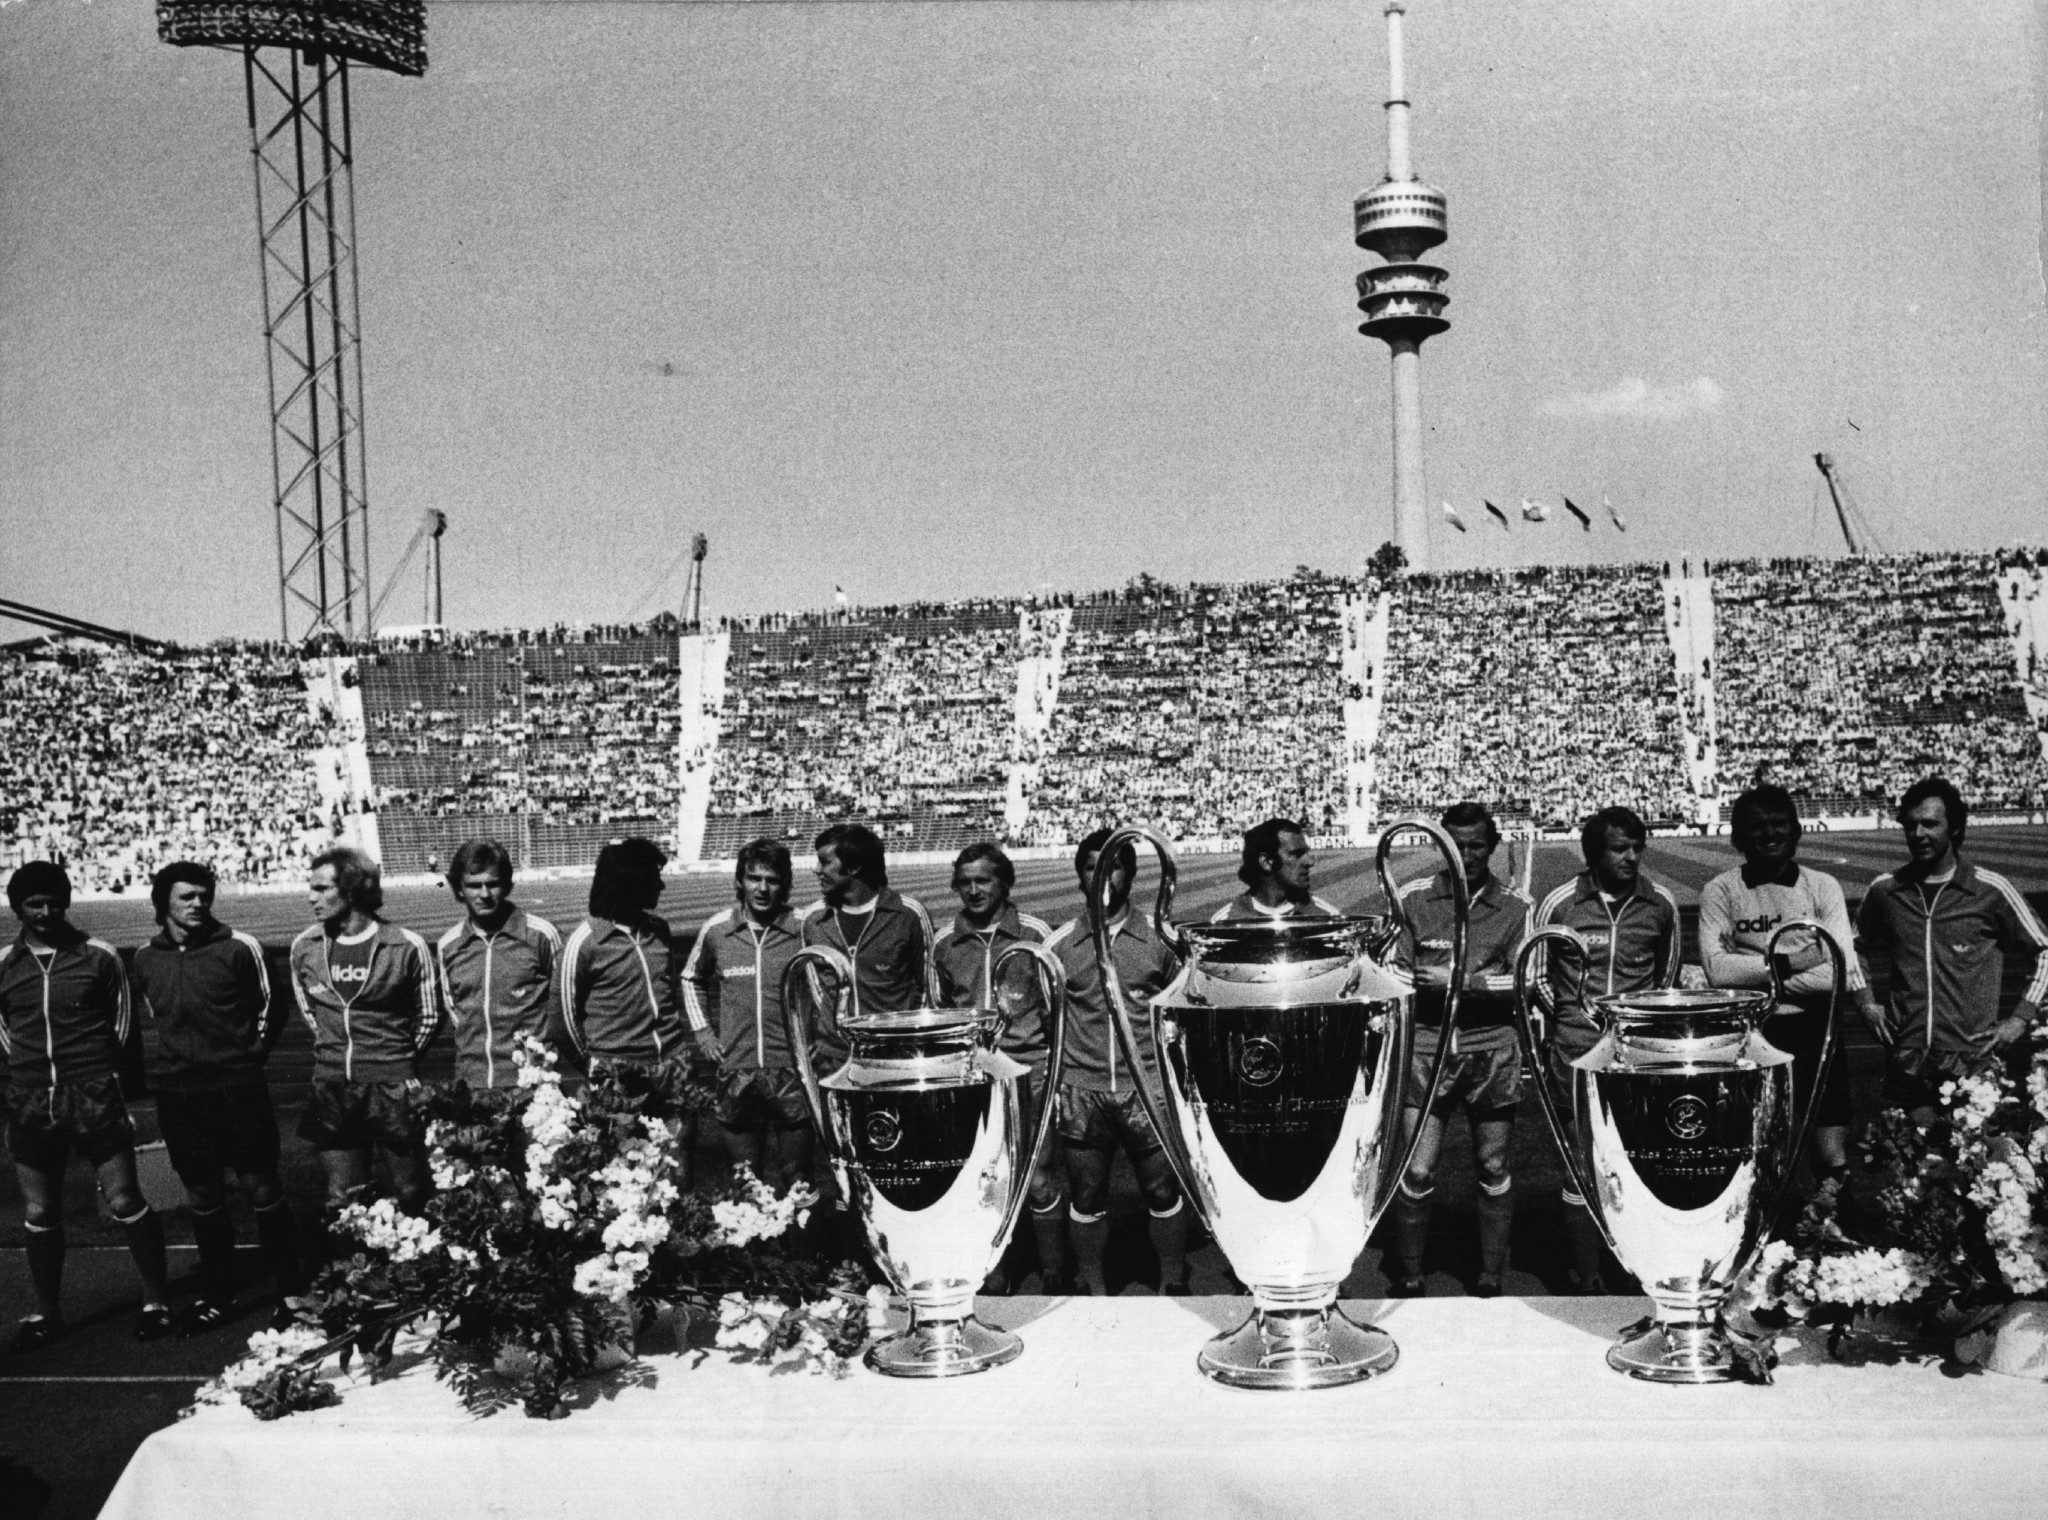 Bayern Munich won the European Cup in 1974, 1975 and 1976 in a golden era for the club at the Olympic Stadium ©Getty Images